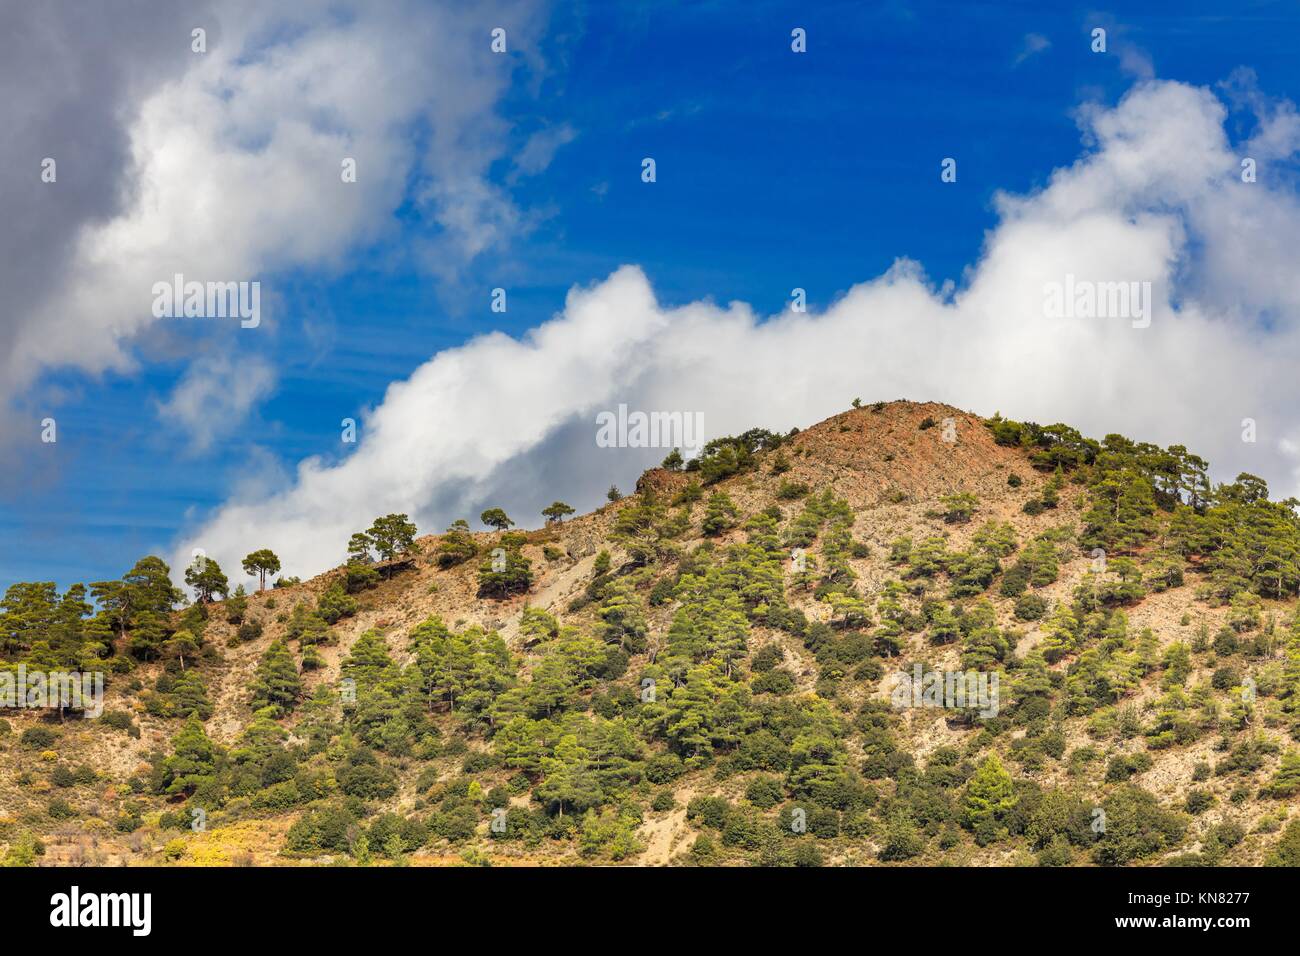 Landscape with hills and bushes in Troodos mountains, Cyprus. Stock Photo